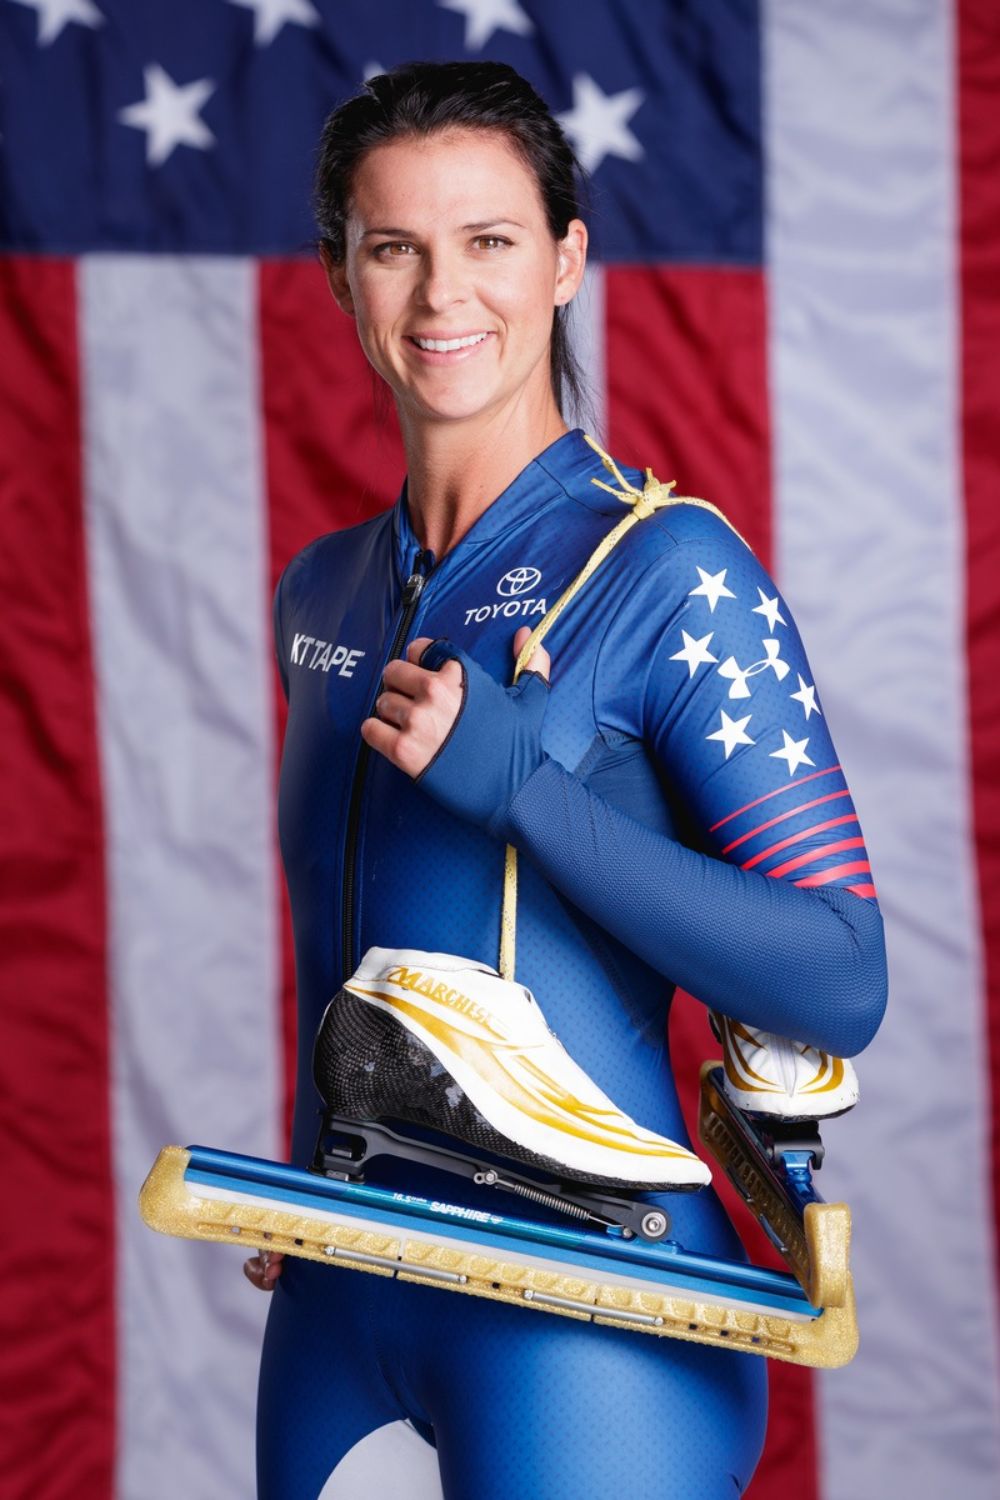 Brittany Bowe, Champion American Speed Skater (Source: Pinterest)